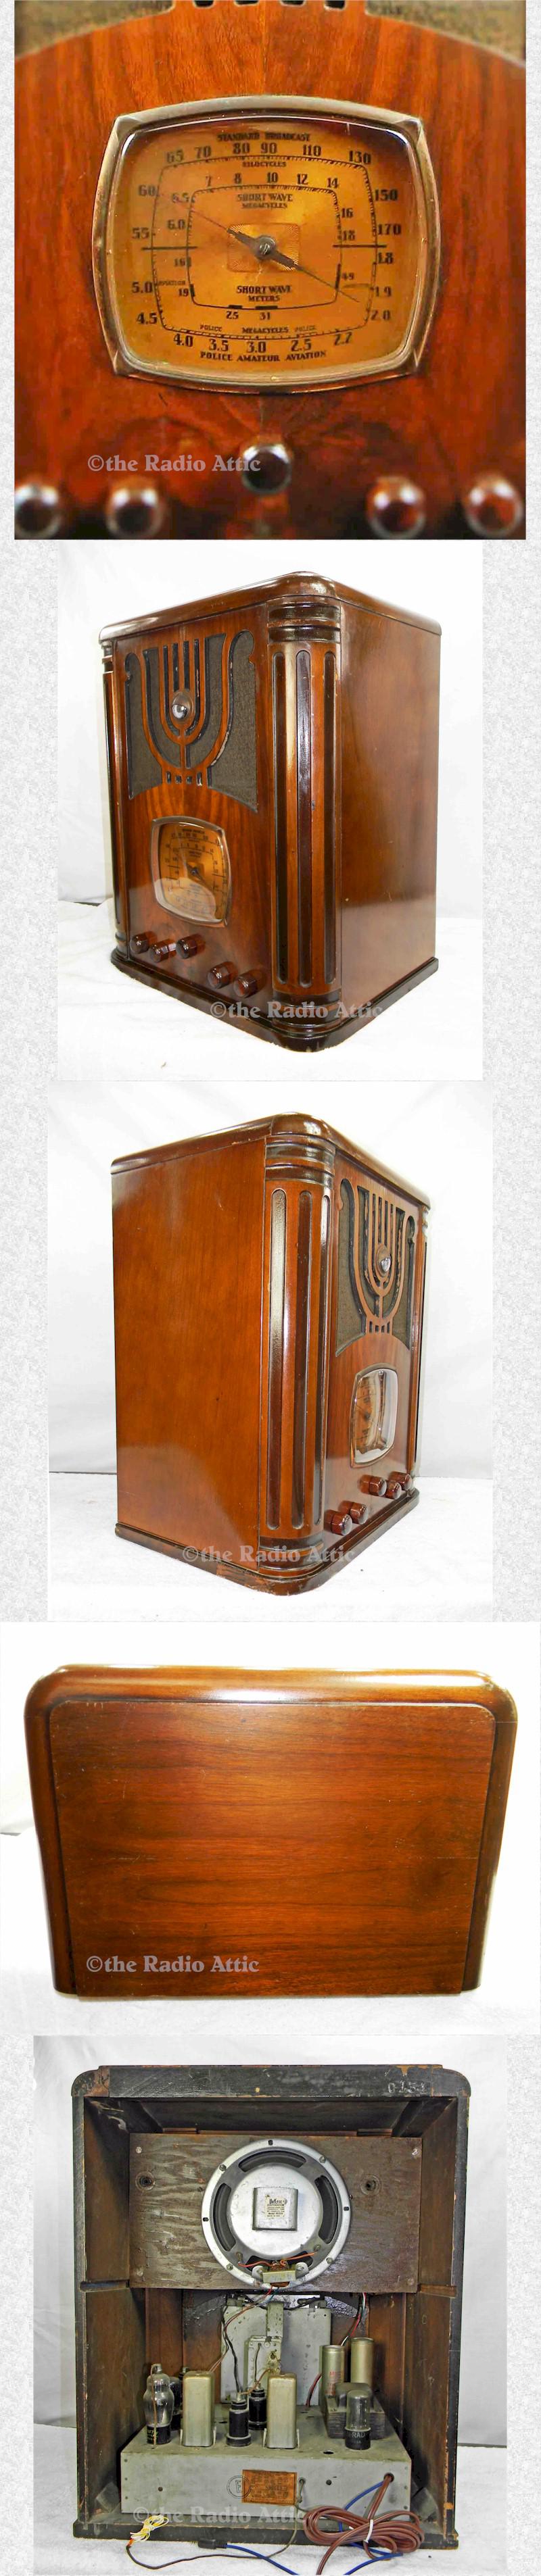 Emerson 134 Tombstone w/Ingraham Cabinet (1937)